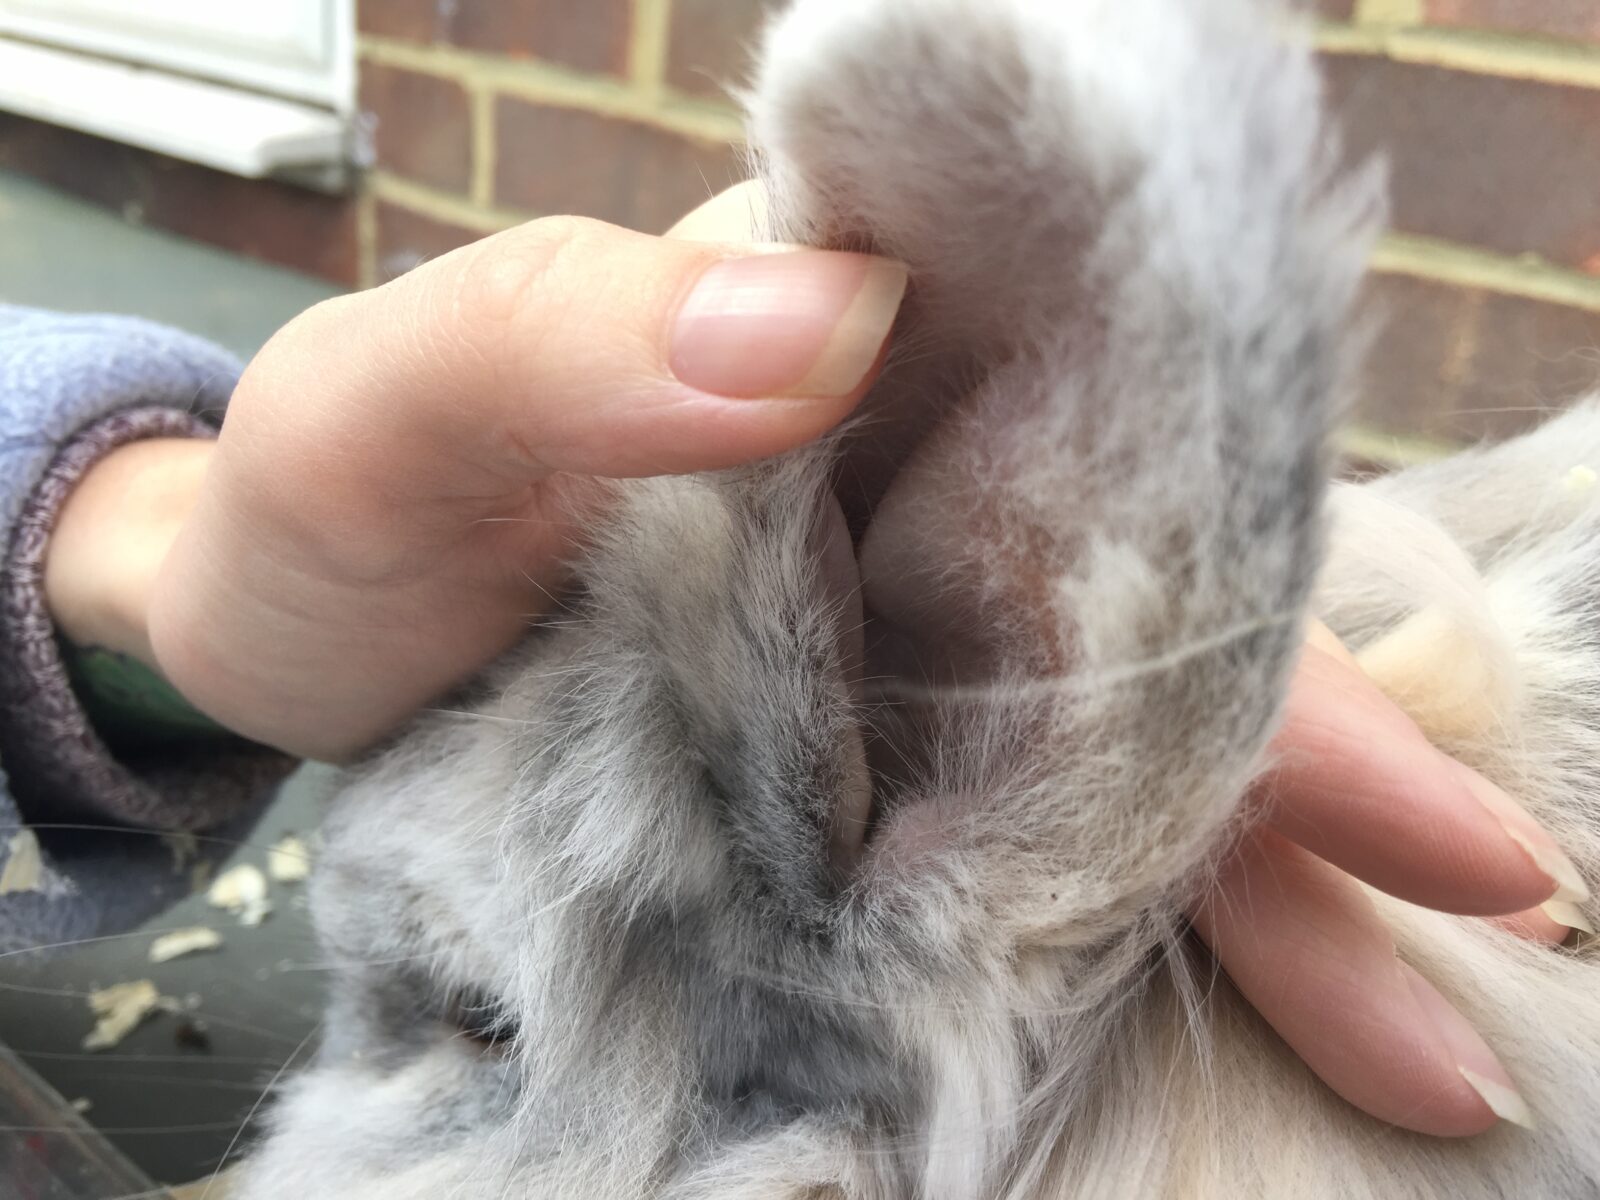 Image shows a close up down a rabbit's ear. The ear is clean with no wax or scabs. 